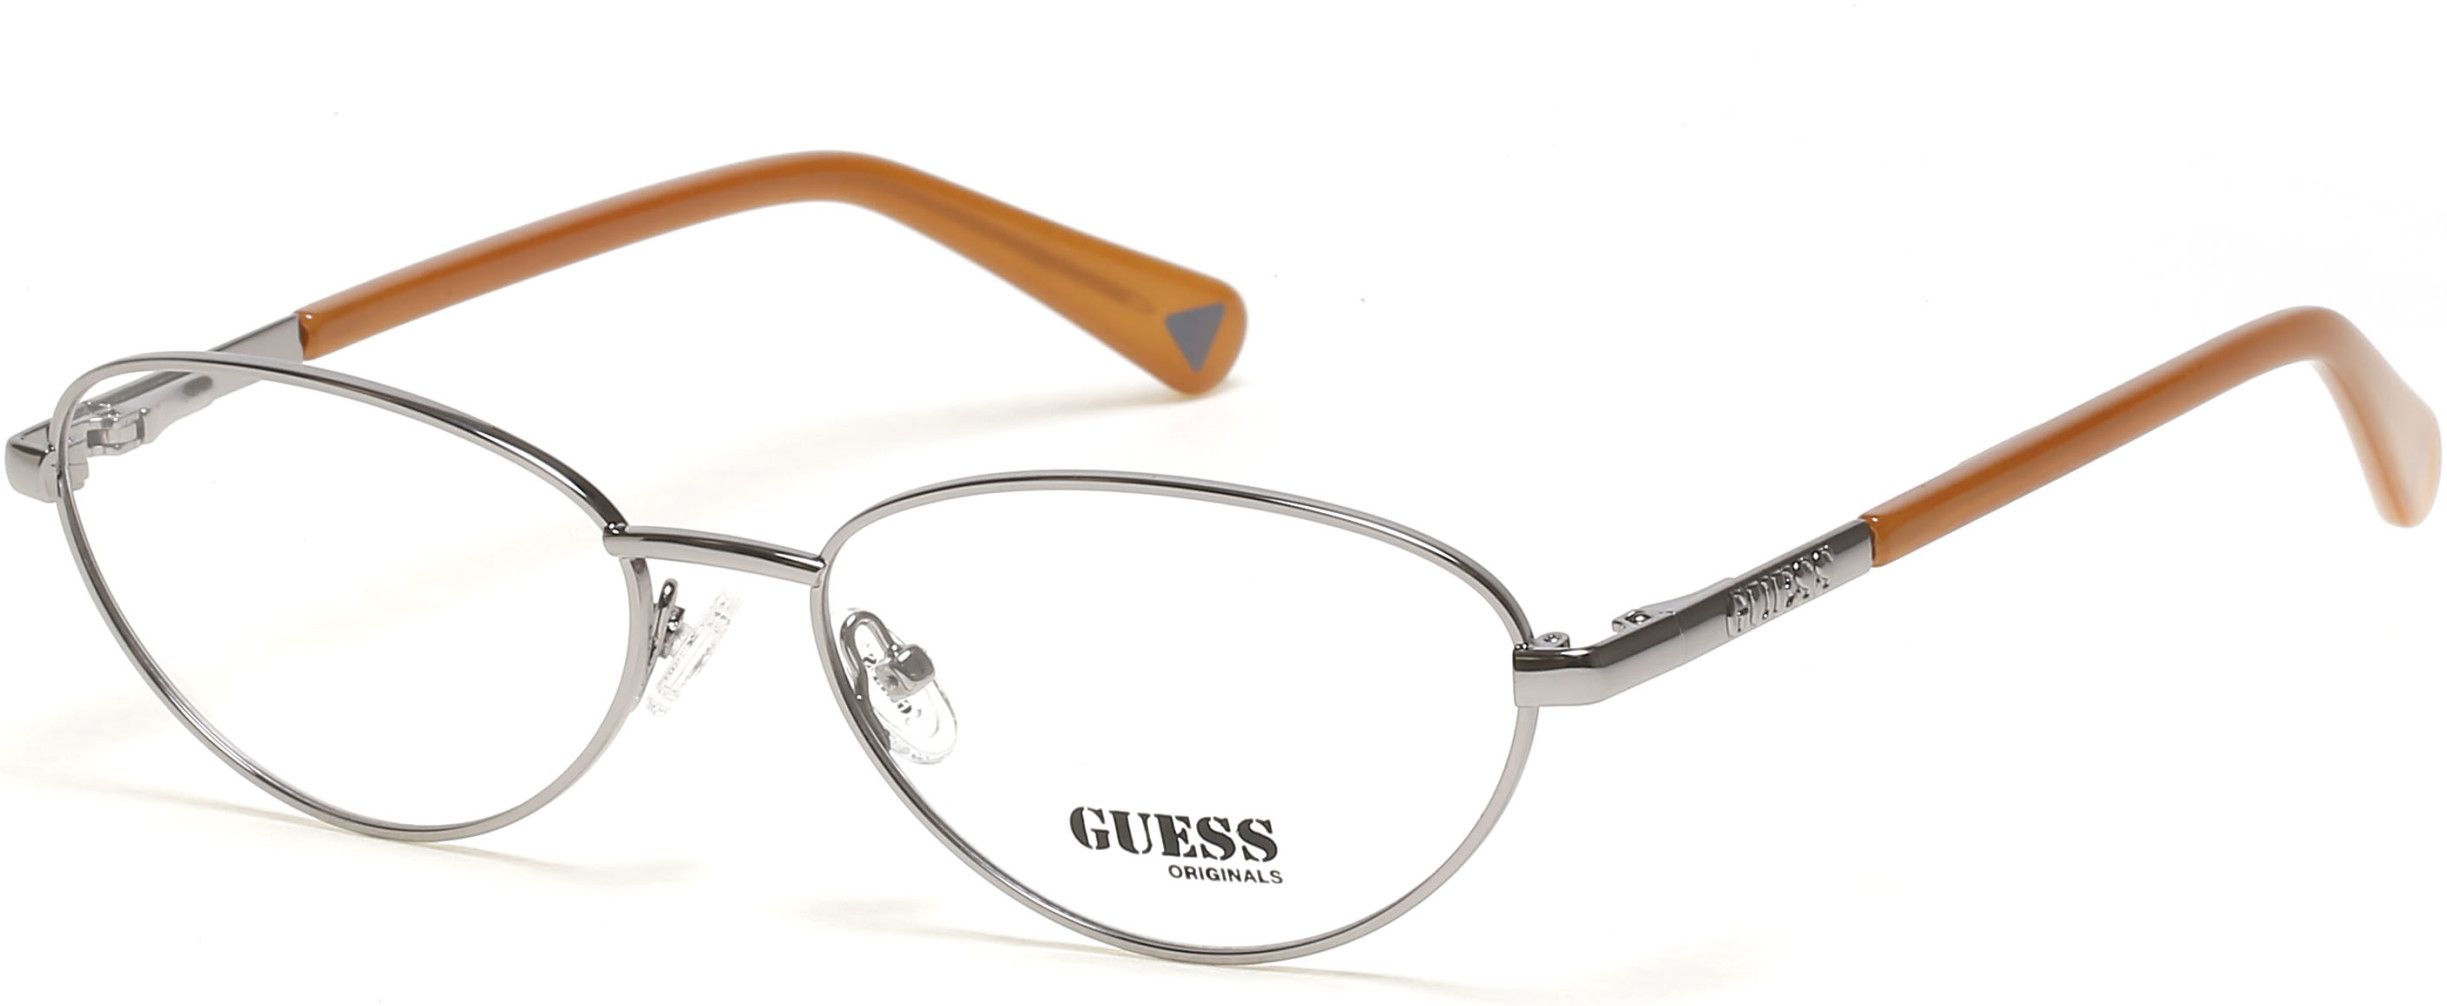 GUESS 8238 008